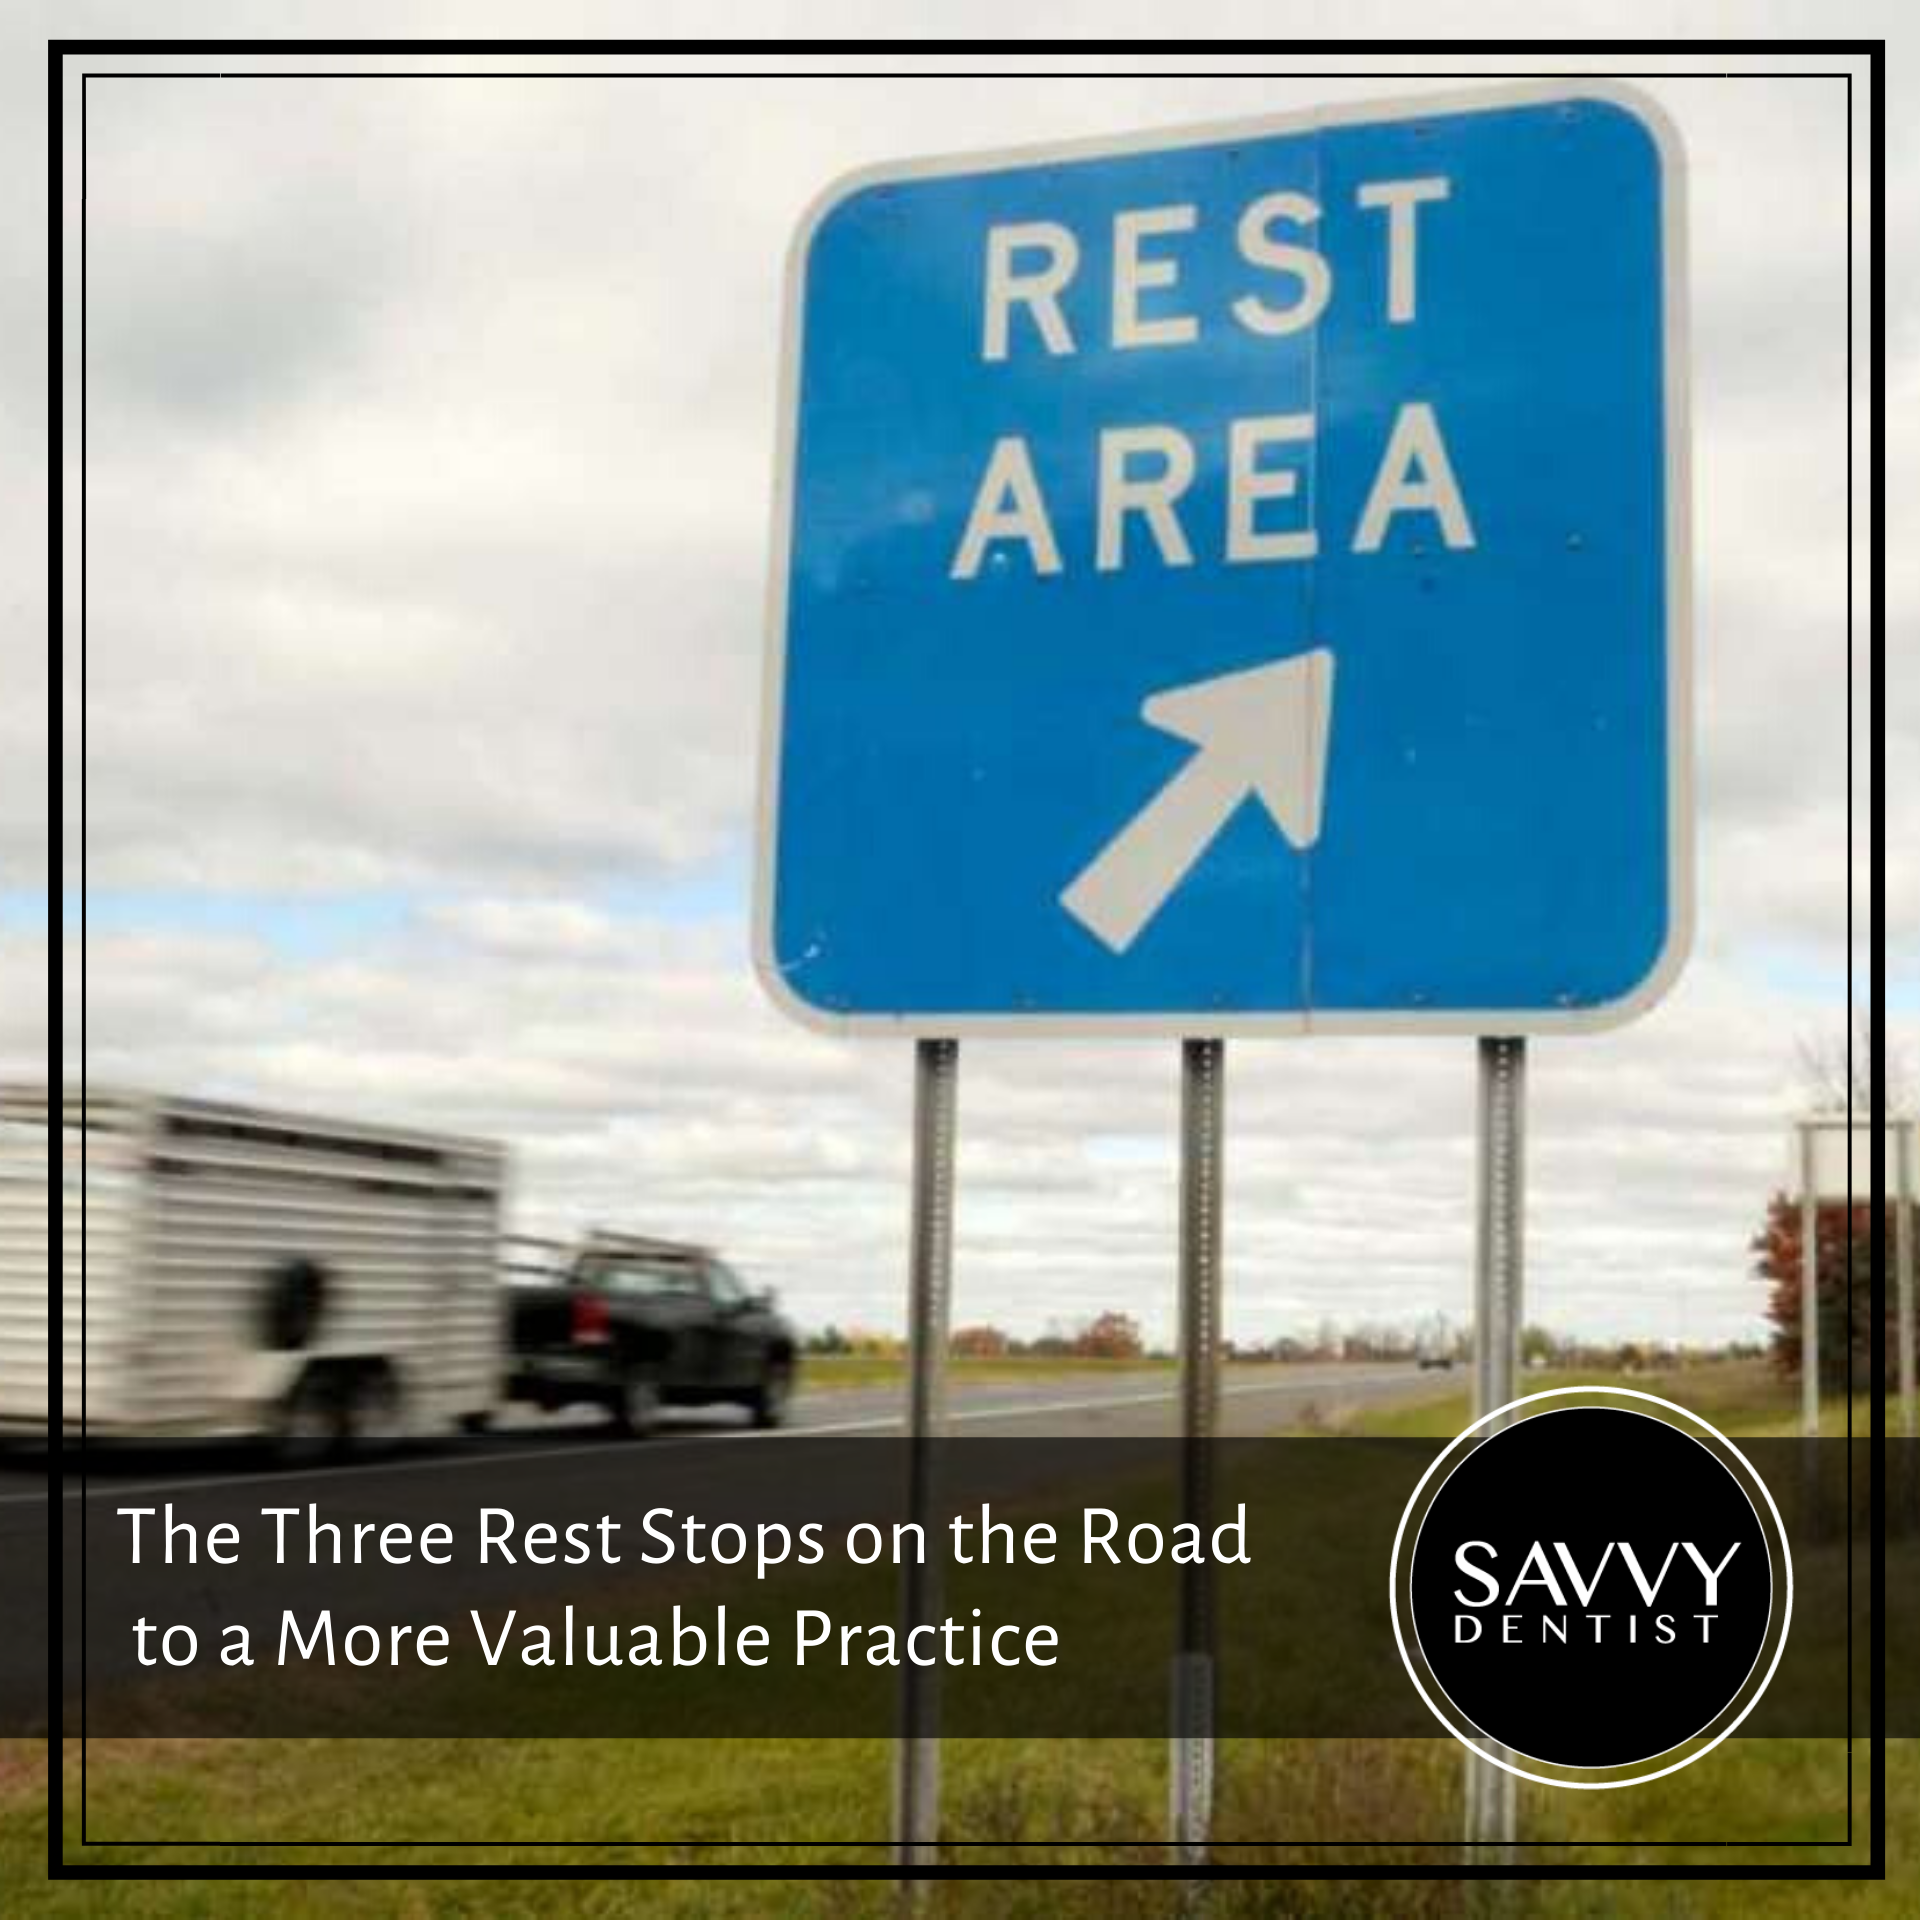 THE THREE REST STOPS ON THE ROAD TO A MORE VALUABLE PRACTICE